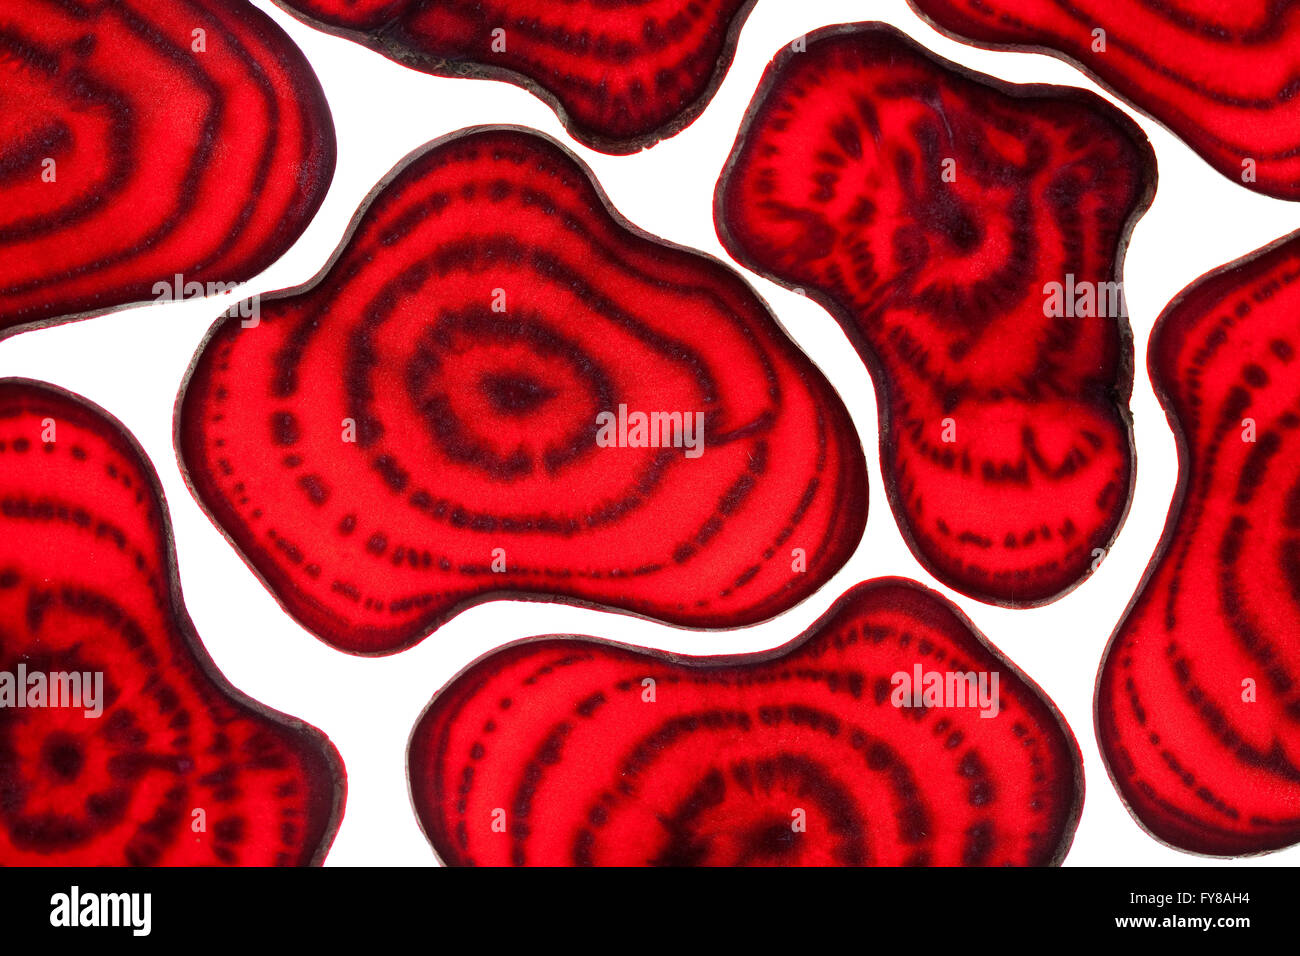 Beetroot sliced and isolated on white Stock Photo